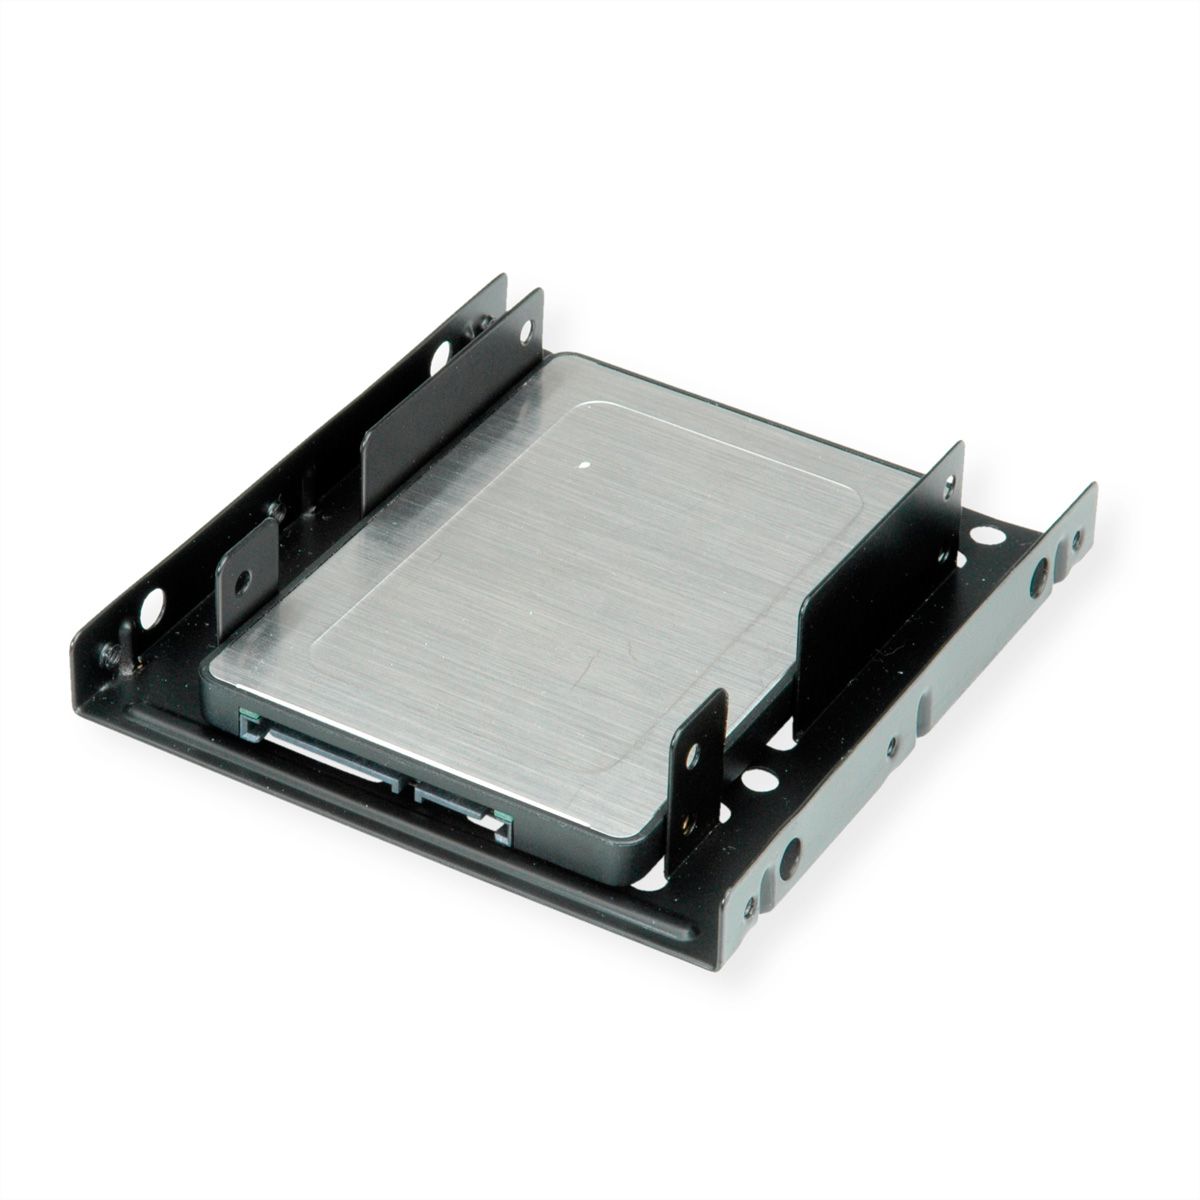 Hdd Ssd Mounting Adapter 3 5 Inch Frame For 2x 2 5 Inch Hdd Ssd Metal Black Secomp International Ag